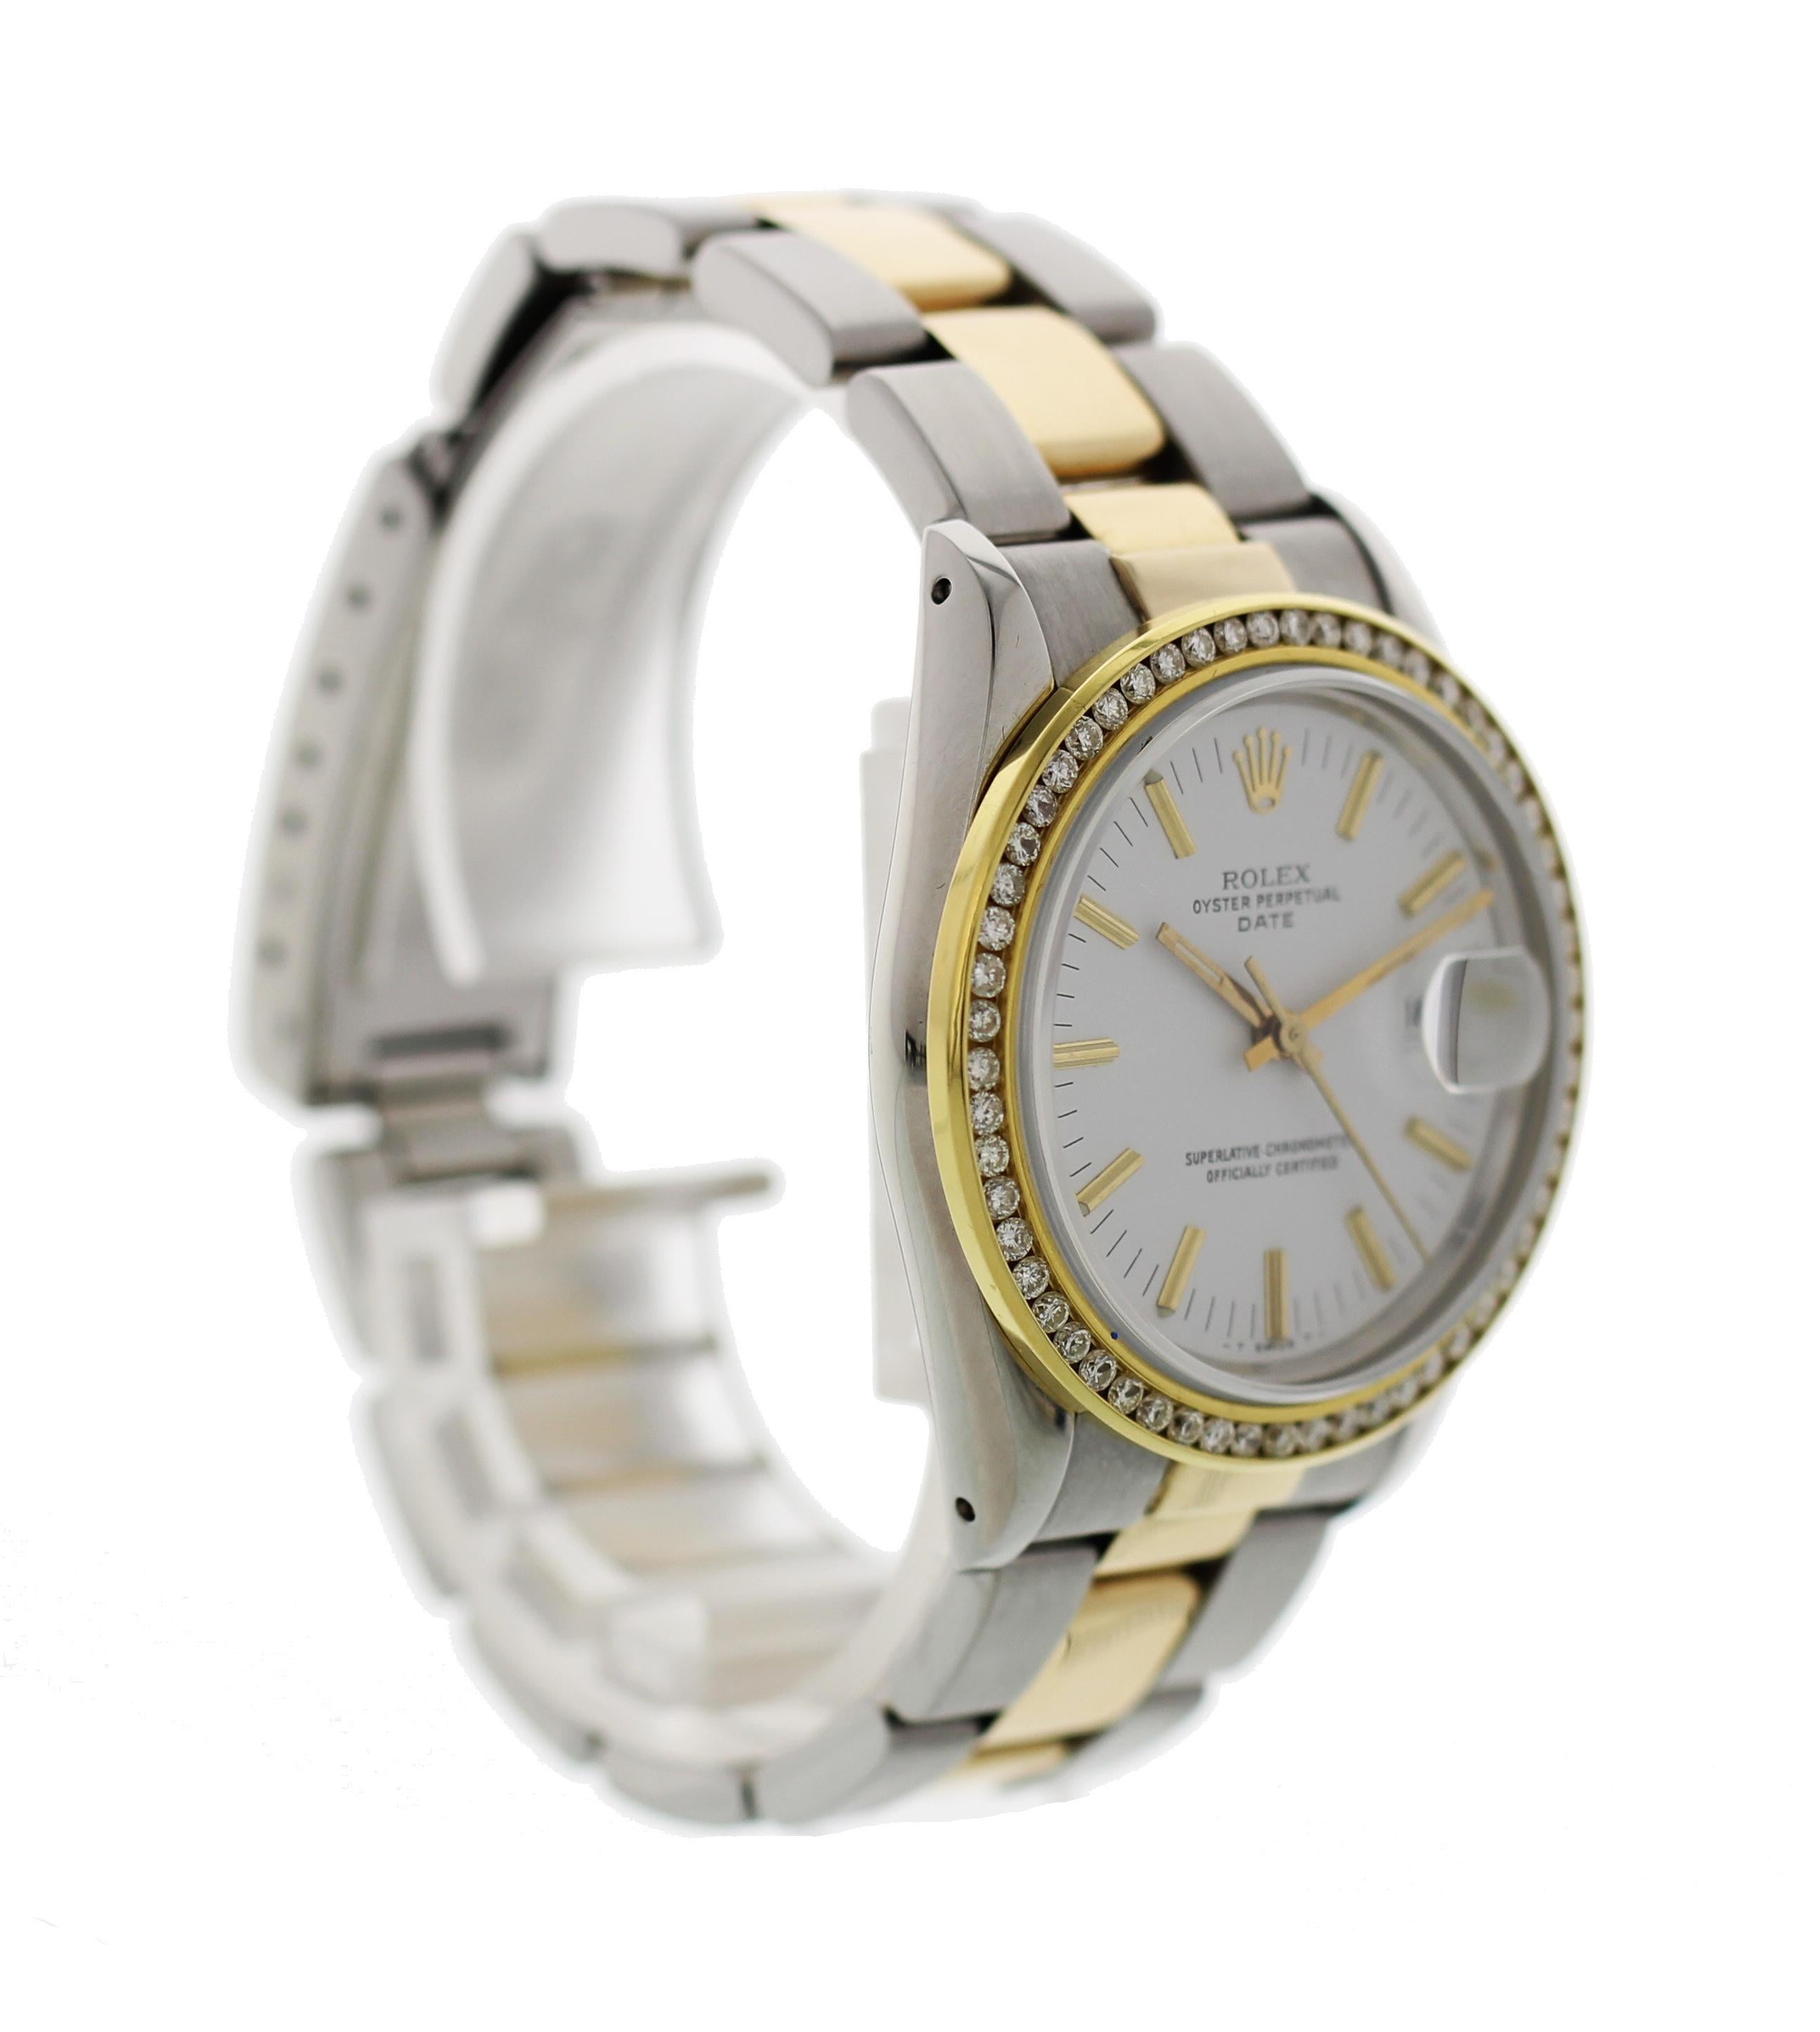 Rolex Oyster Perpetual Date 15053 Two-Tone Diamond Bezel In Excellent Condition For Sale In New York, NY